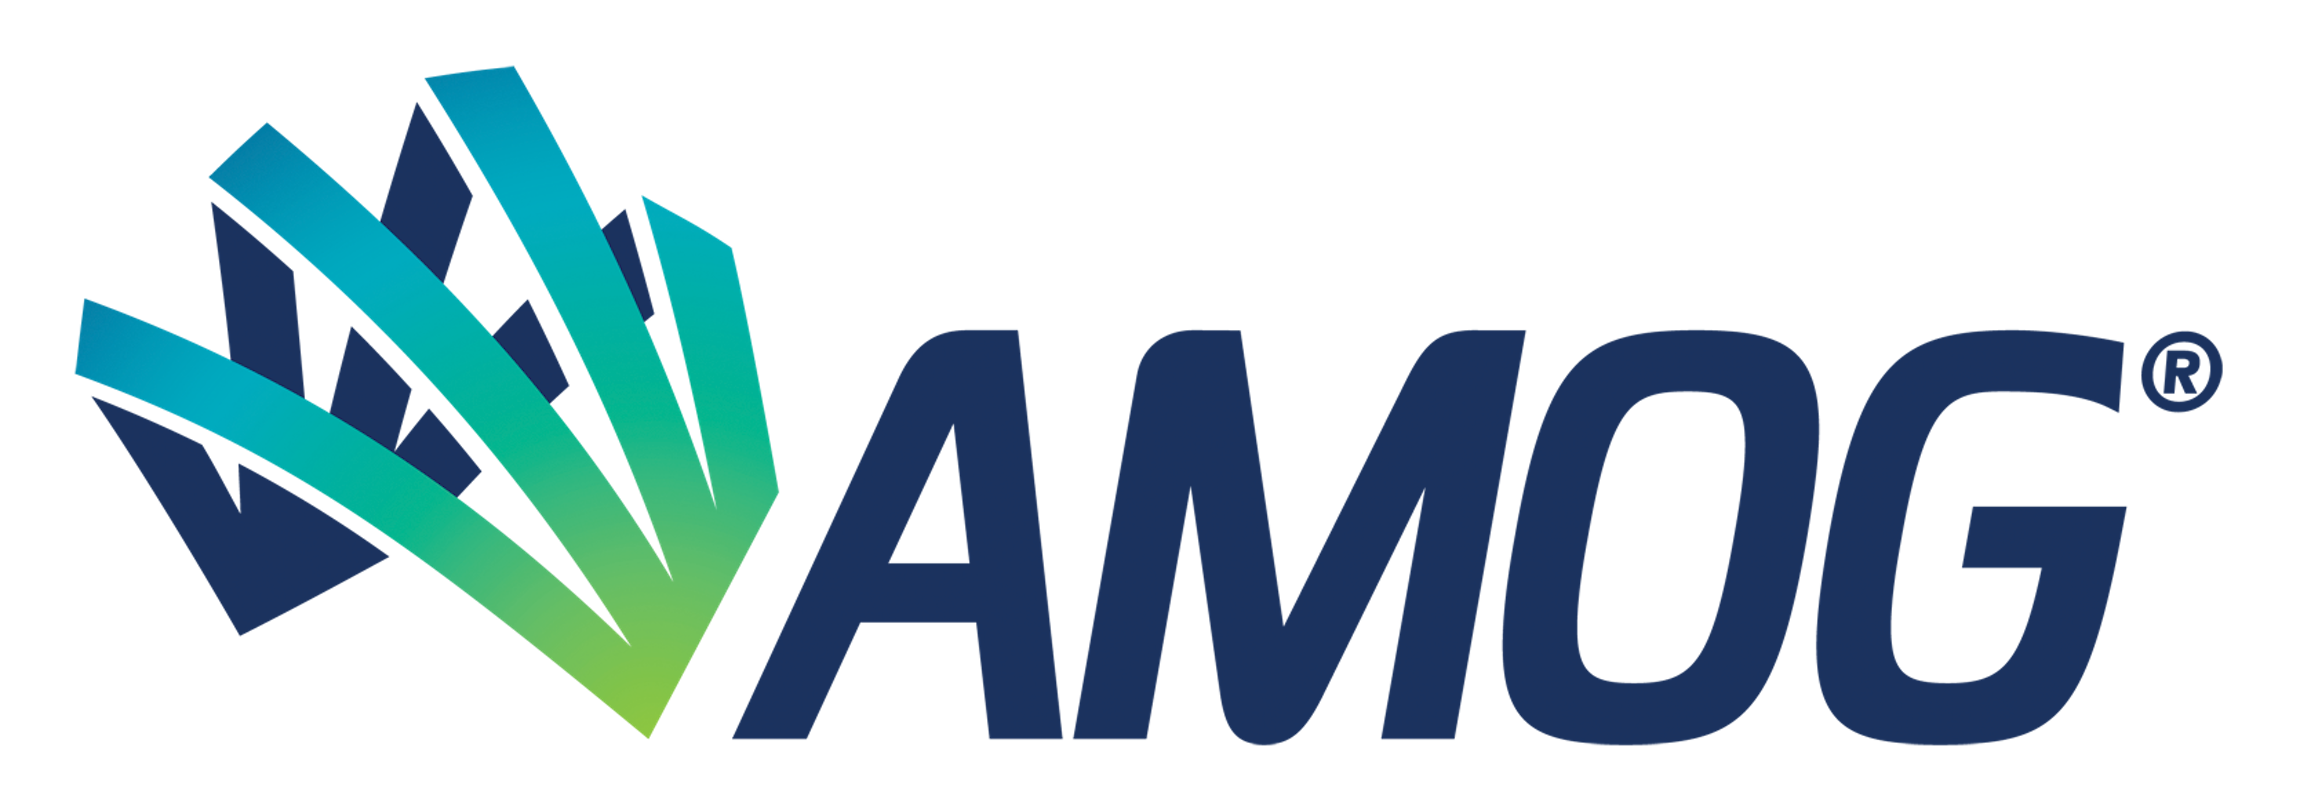 AMOG Consulting